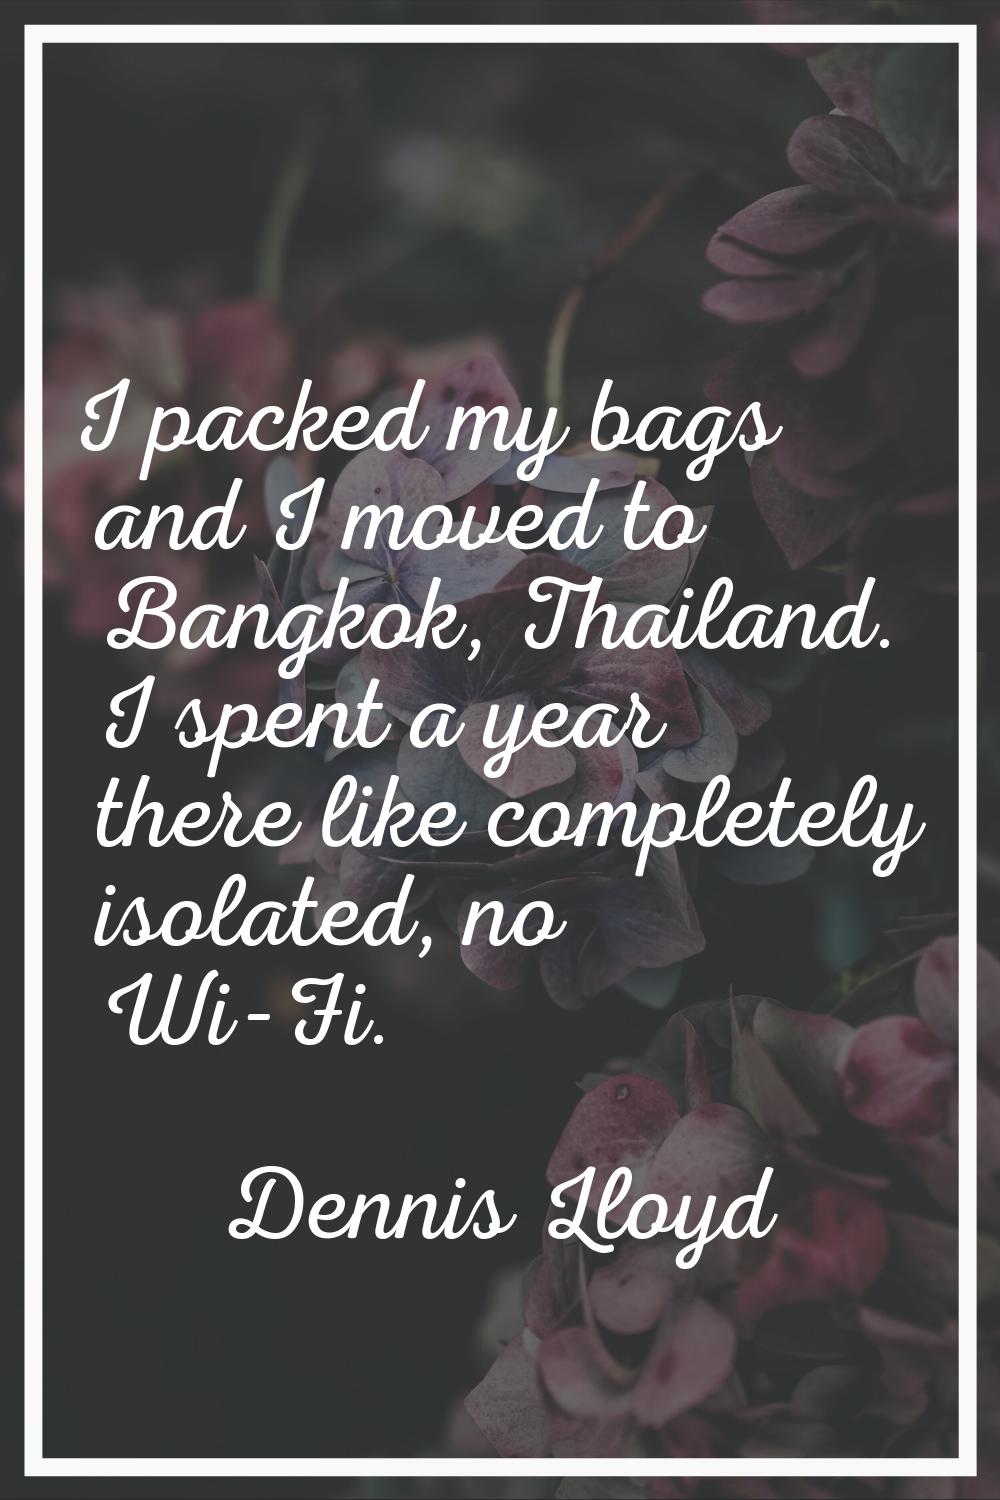 I packed my bags and I moved to Bangkok, Thailand. I spent a year there like completely isolated, n